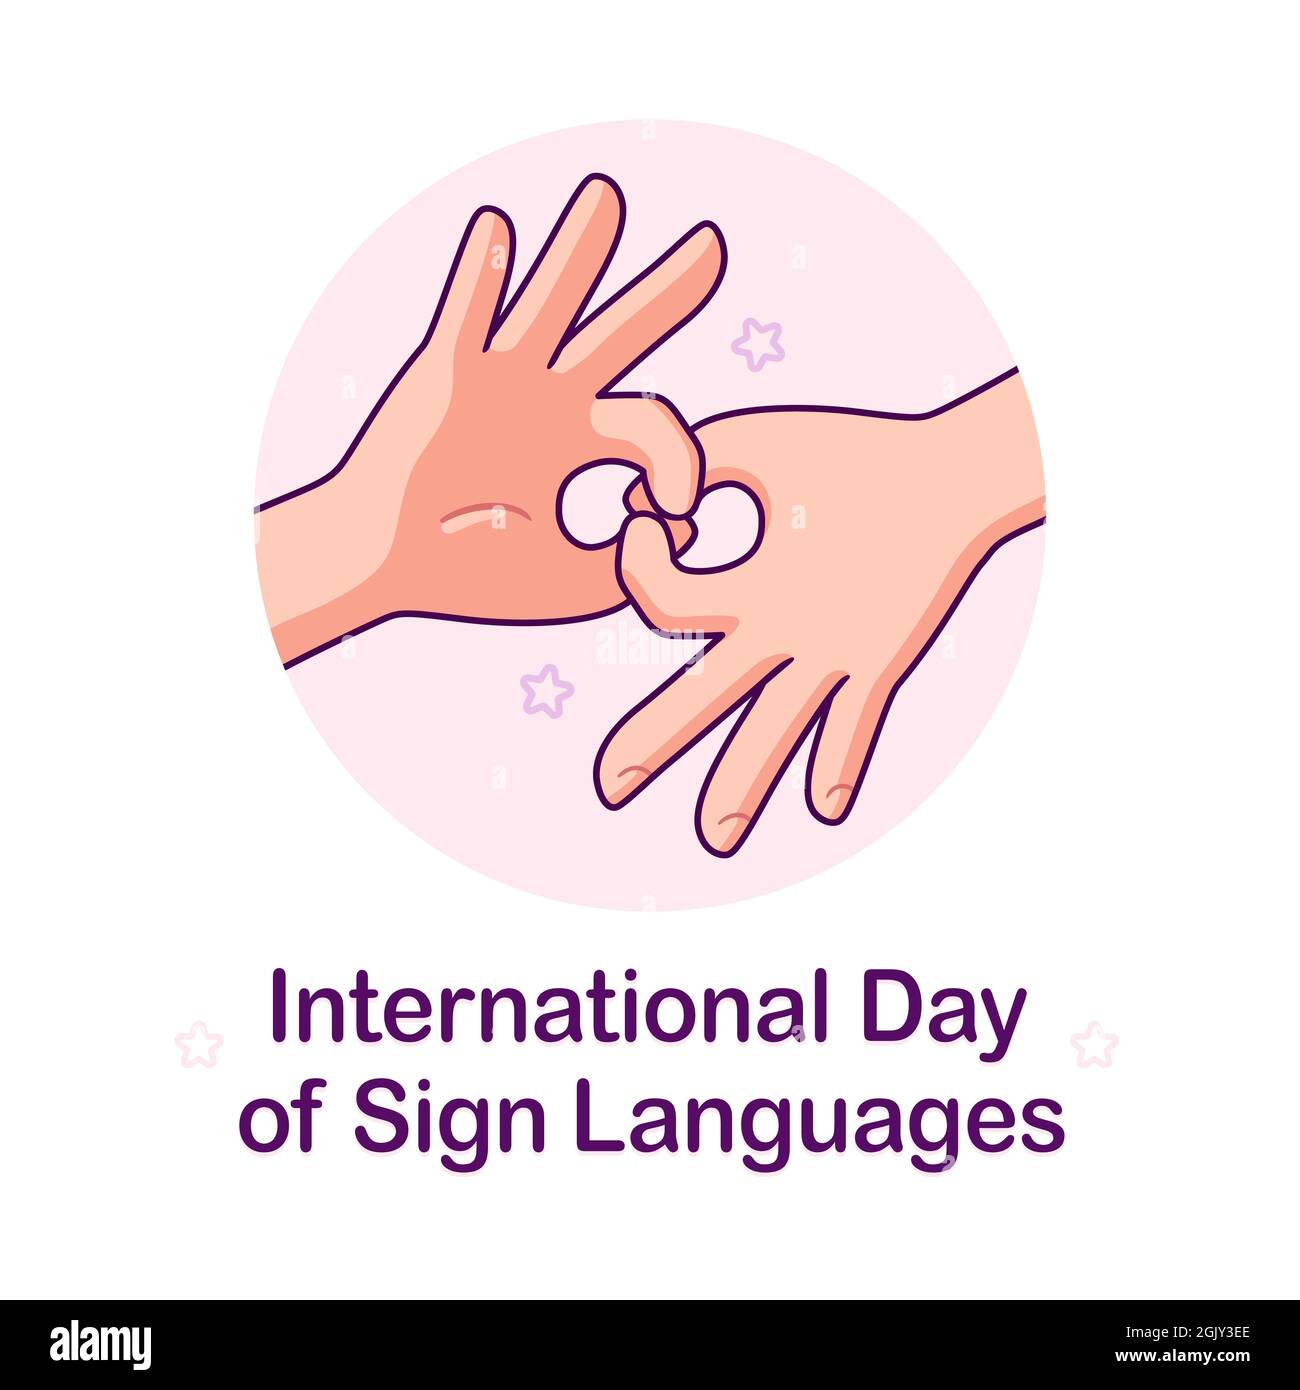 International day of Sign Languages poster. Cartoon hands making symbol 'Connect'. Vector illustration. Stock Vector